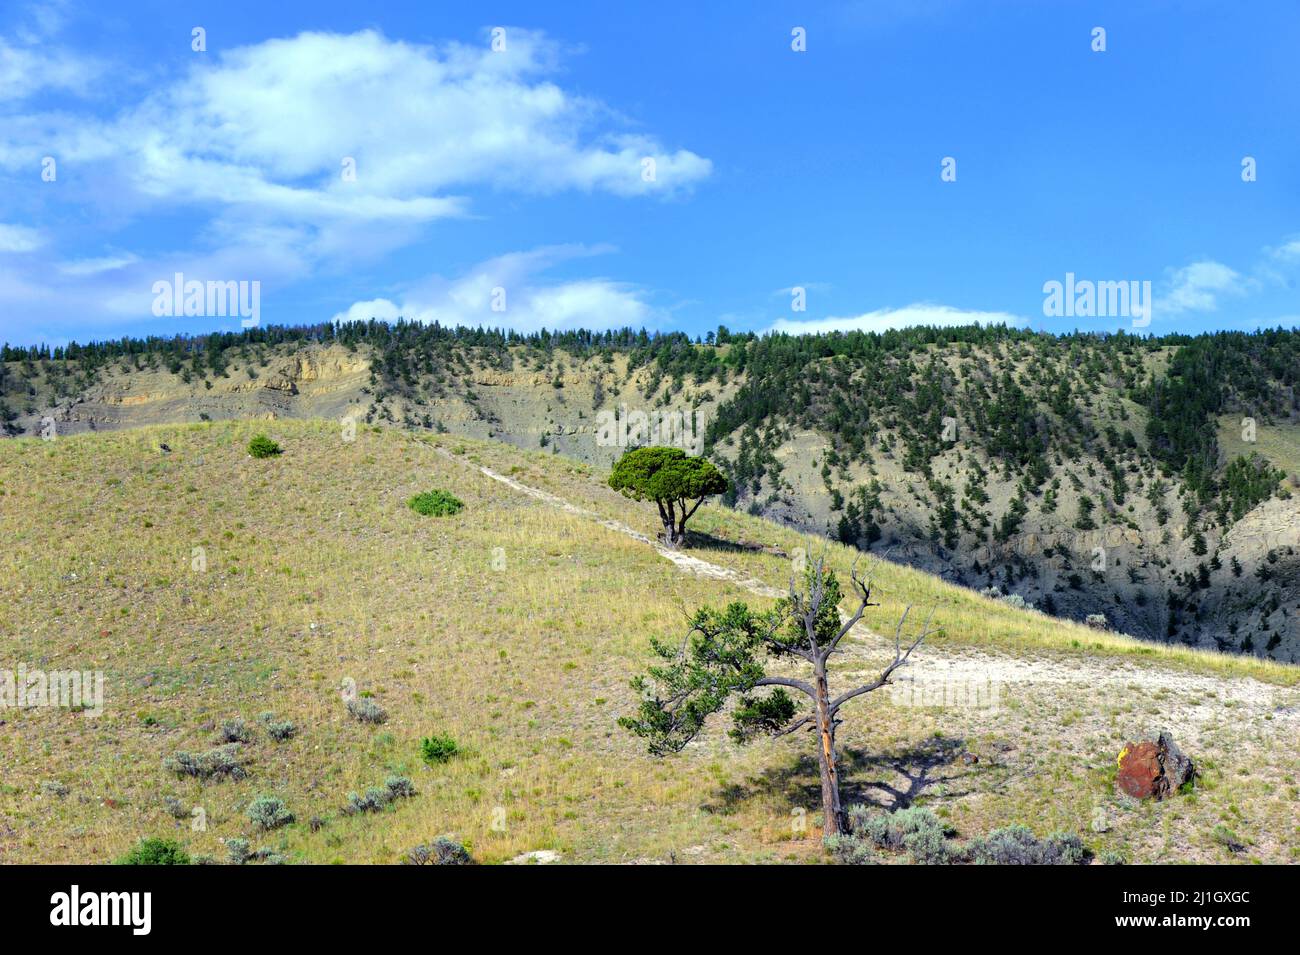 Worn trail traverses to the top of a hill, with scenic overlook, in Yellowstone National Park.  Two lone trees grow on sparse hillside. Stock Photo